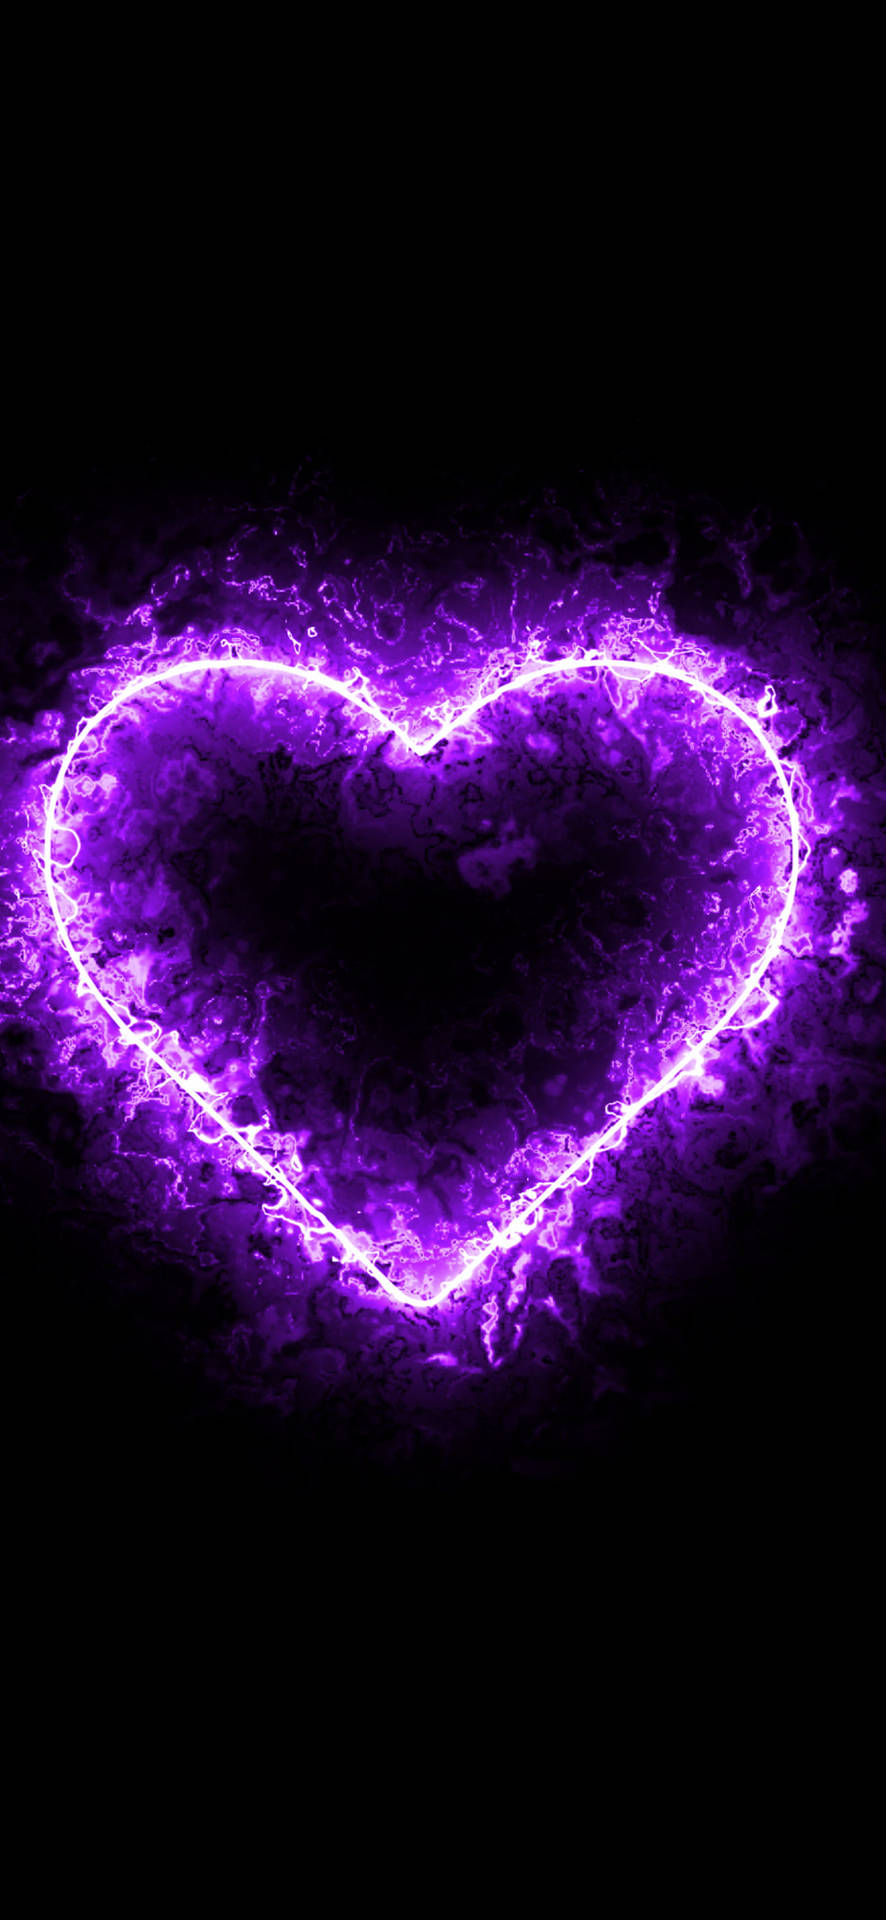 Black And Purple Aesthetic Textured Heart Background